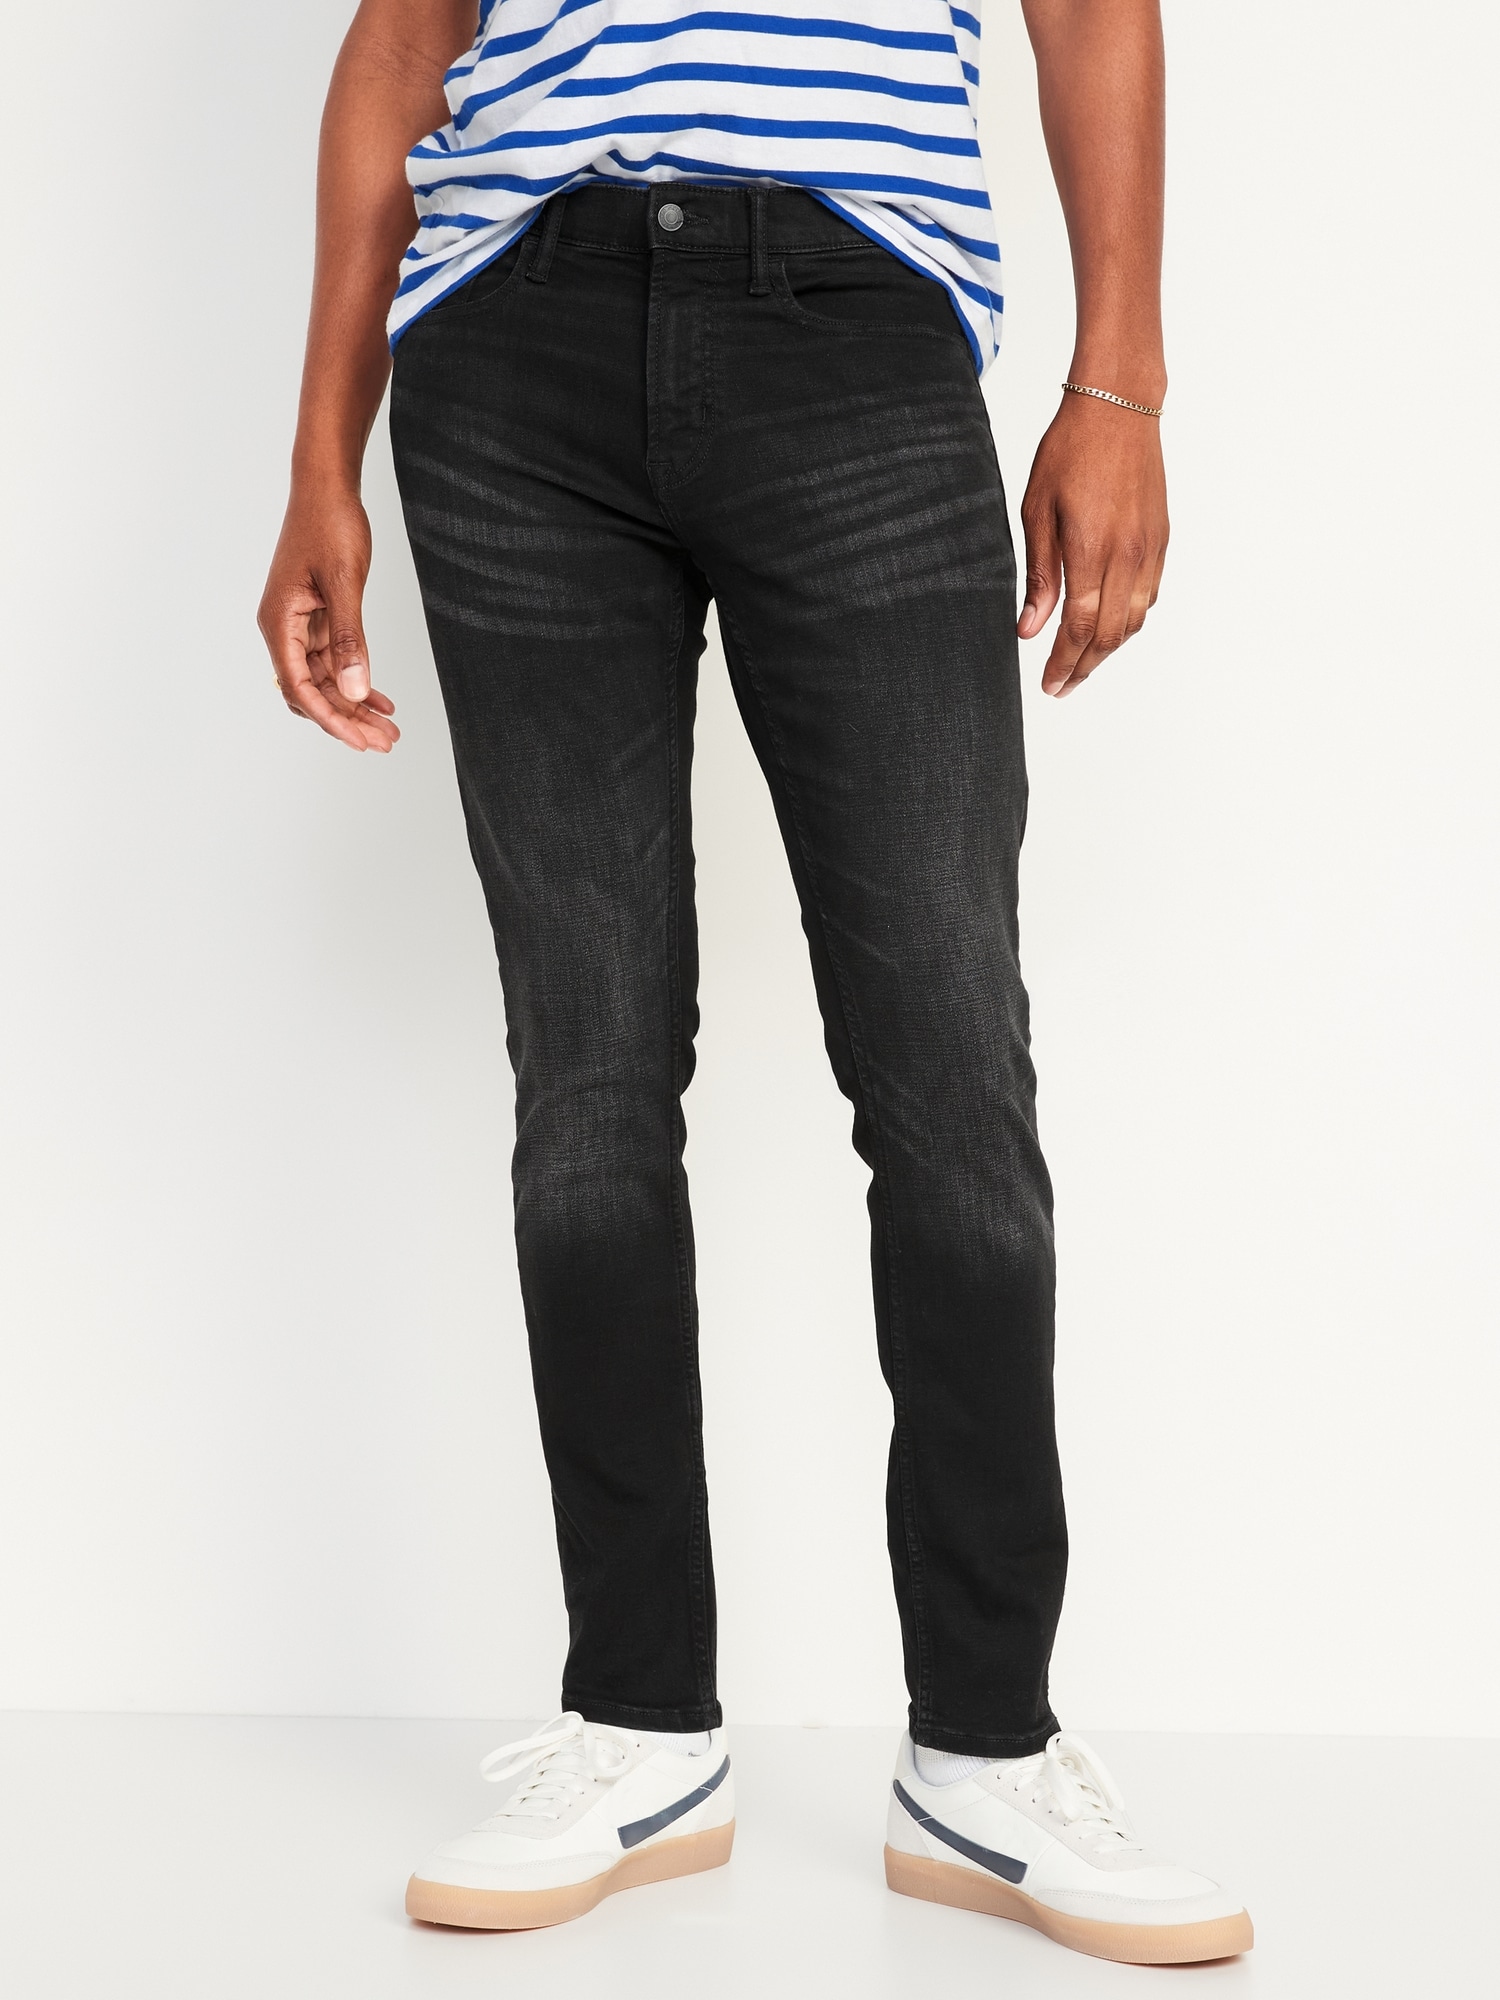 salami Cayo Padre Skinny 360° Stretch Performance Jeans for Men | Old Navy